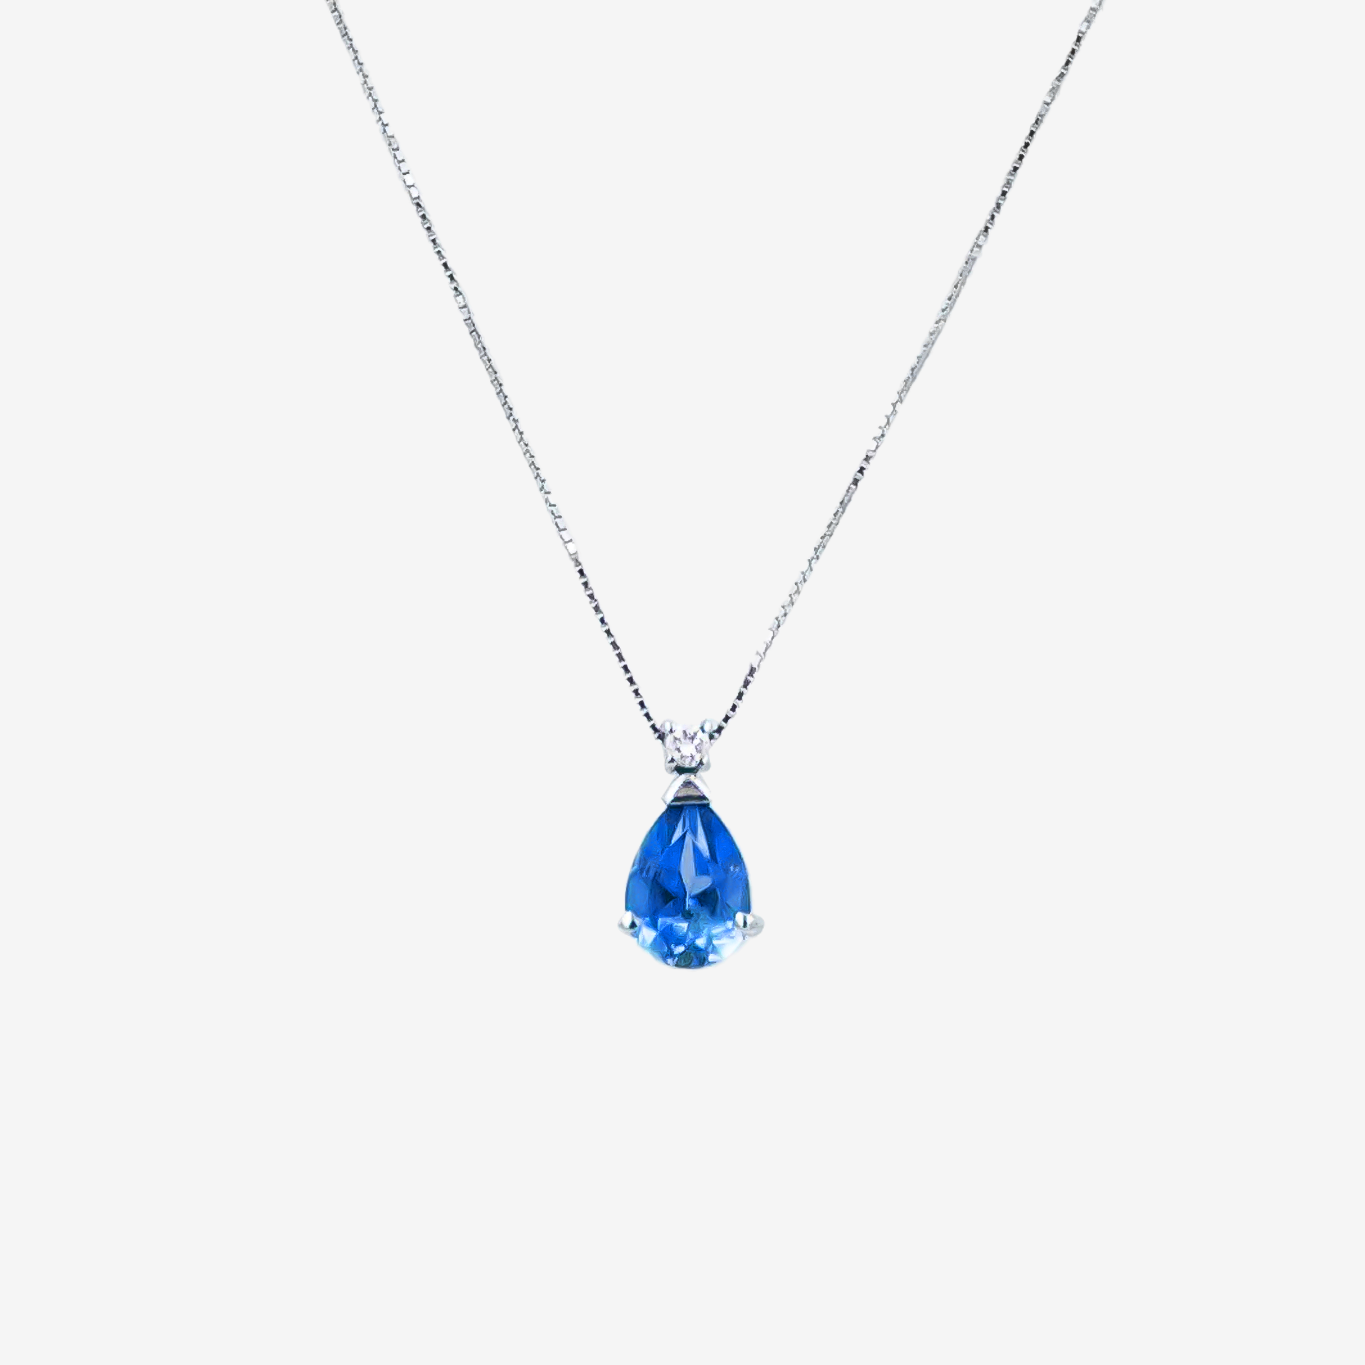 Droplet necklace with Diamond and Tanzanite